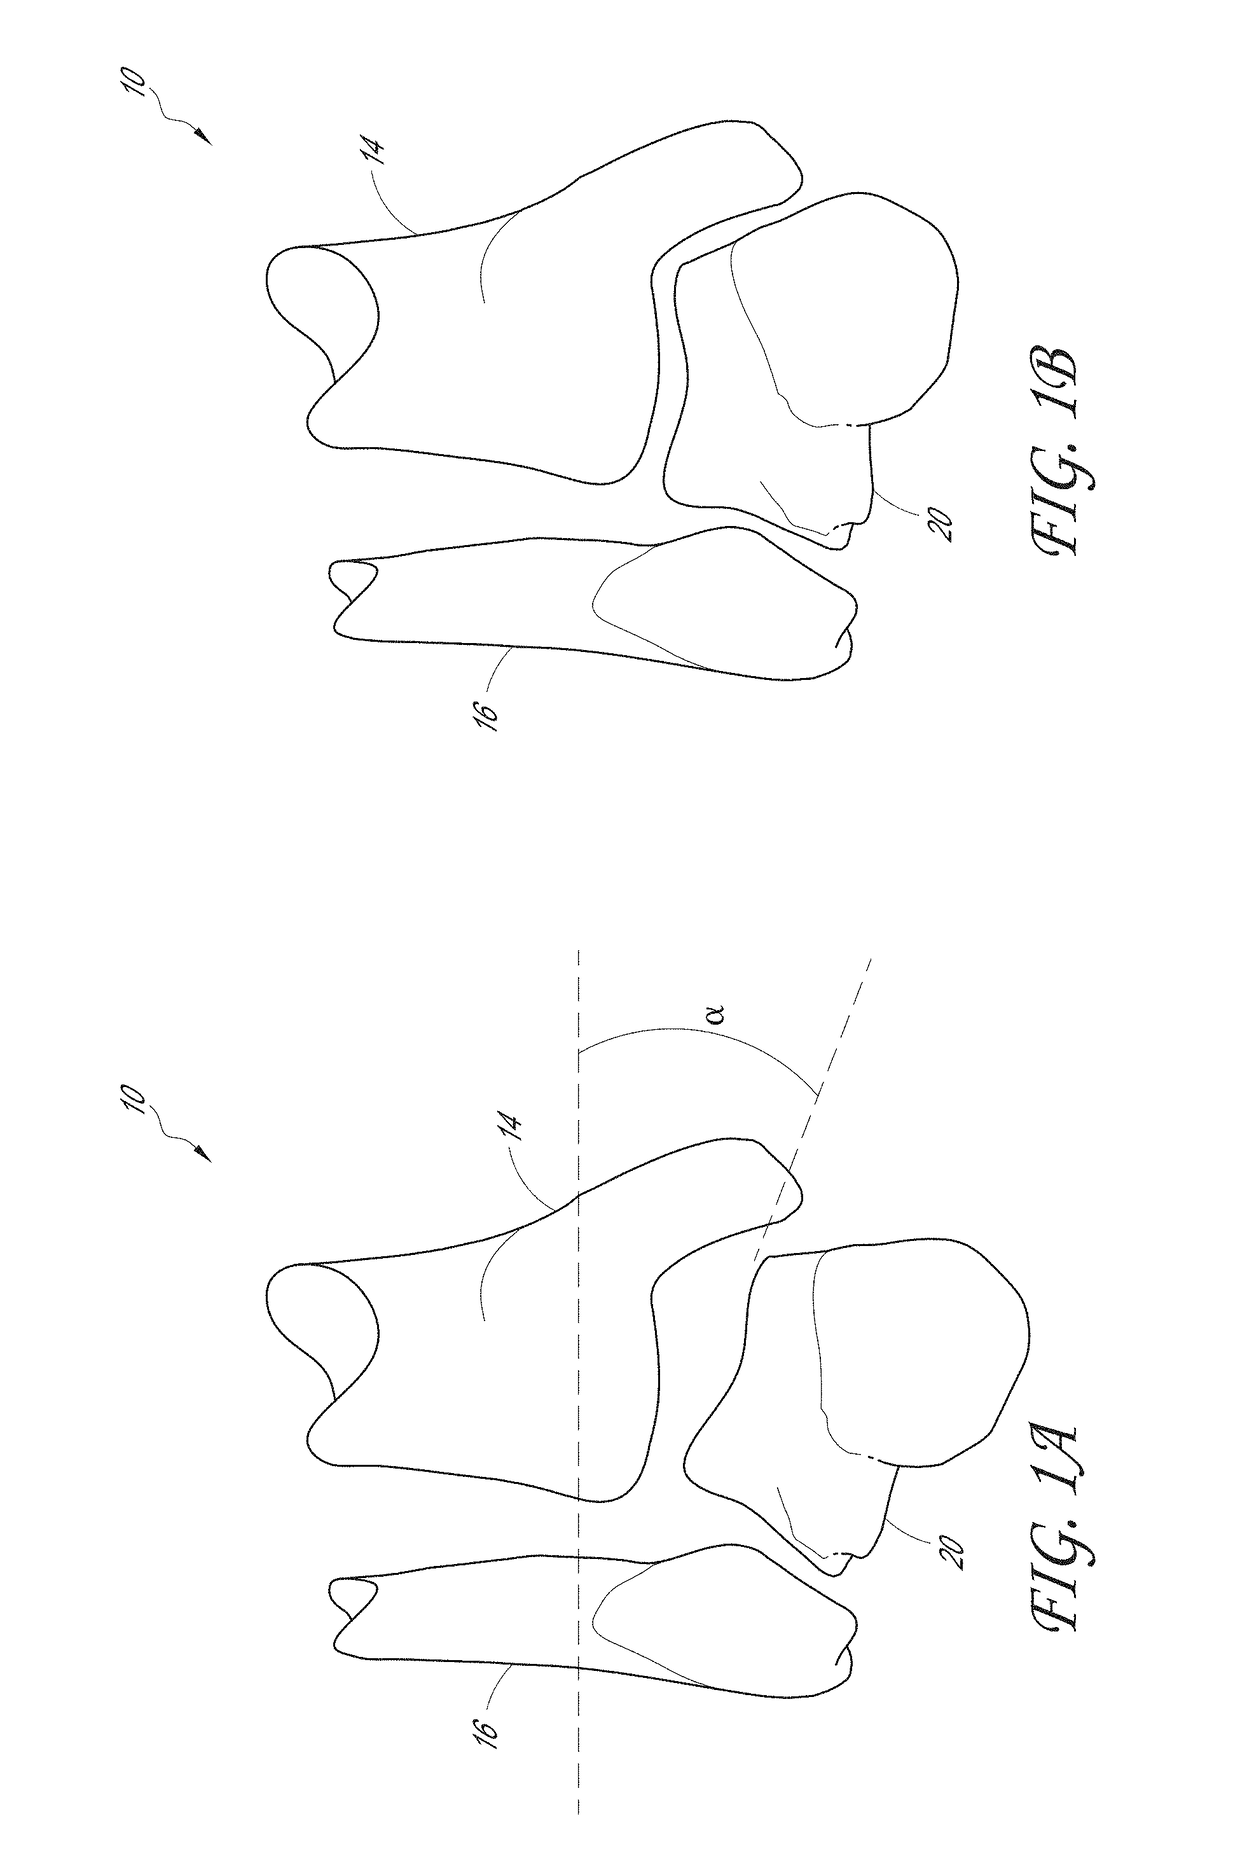 Patient specific instruments and methods for joint prosthesis